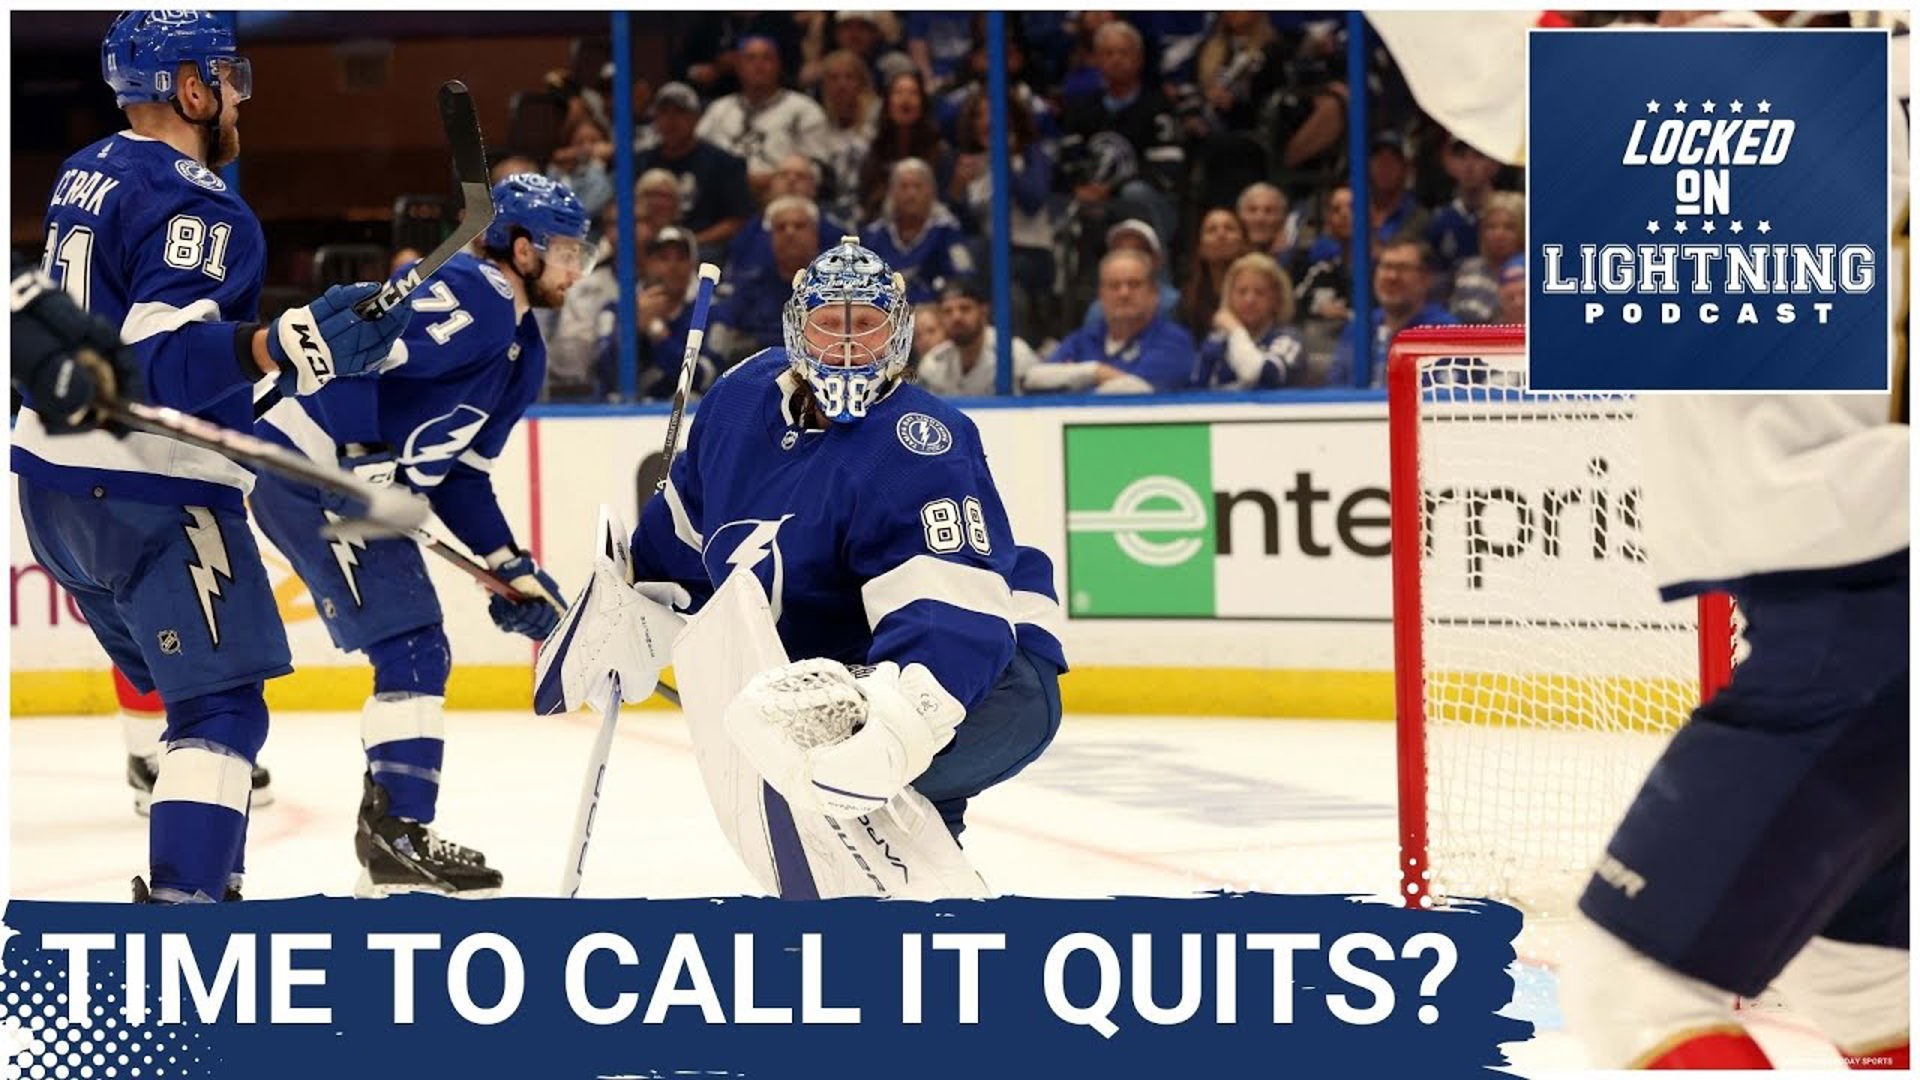 We were all hoping to see a catastrophic turn around in Game 3, but unfortunately for us, and the Lightning, that was not the case.